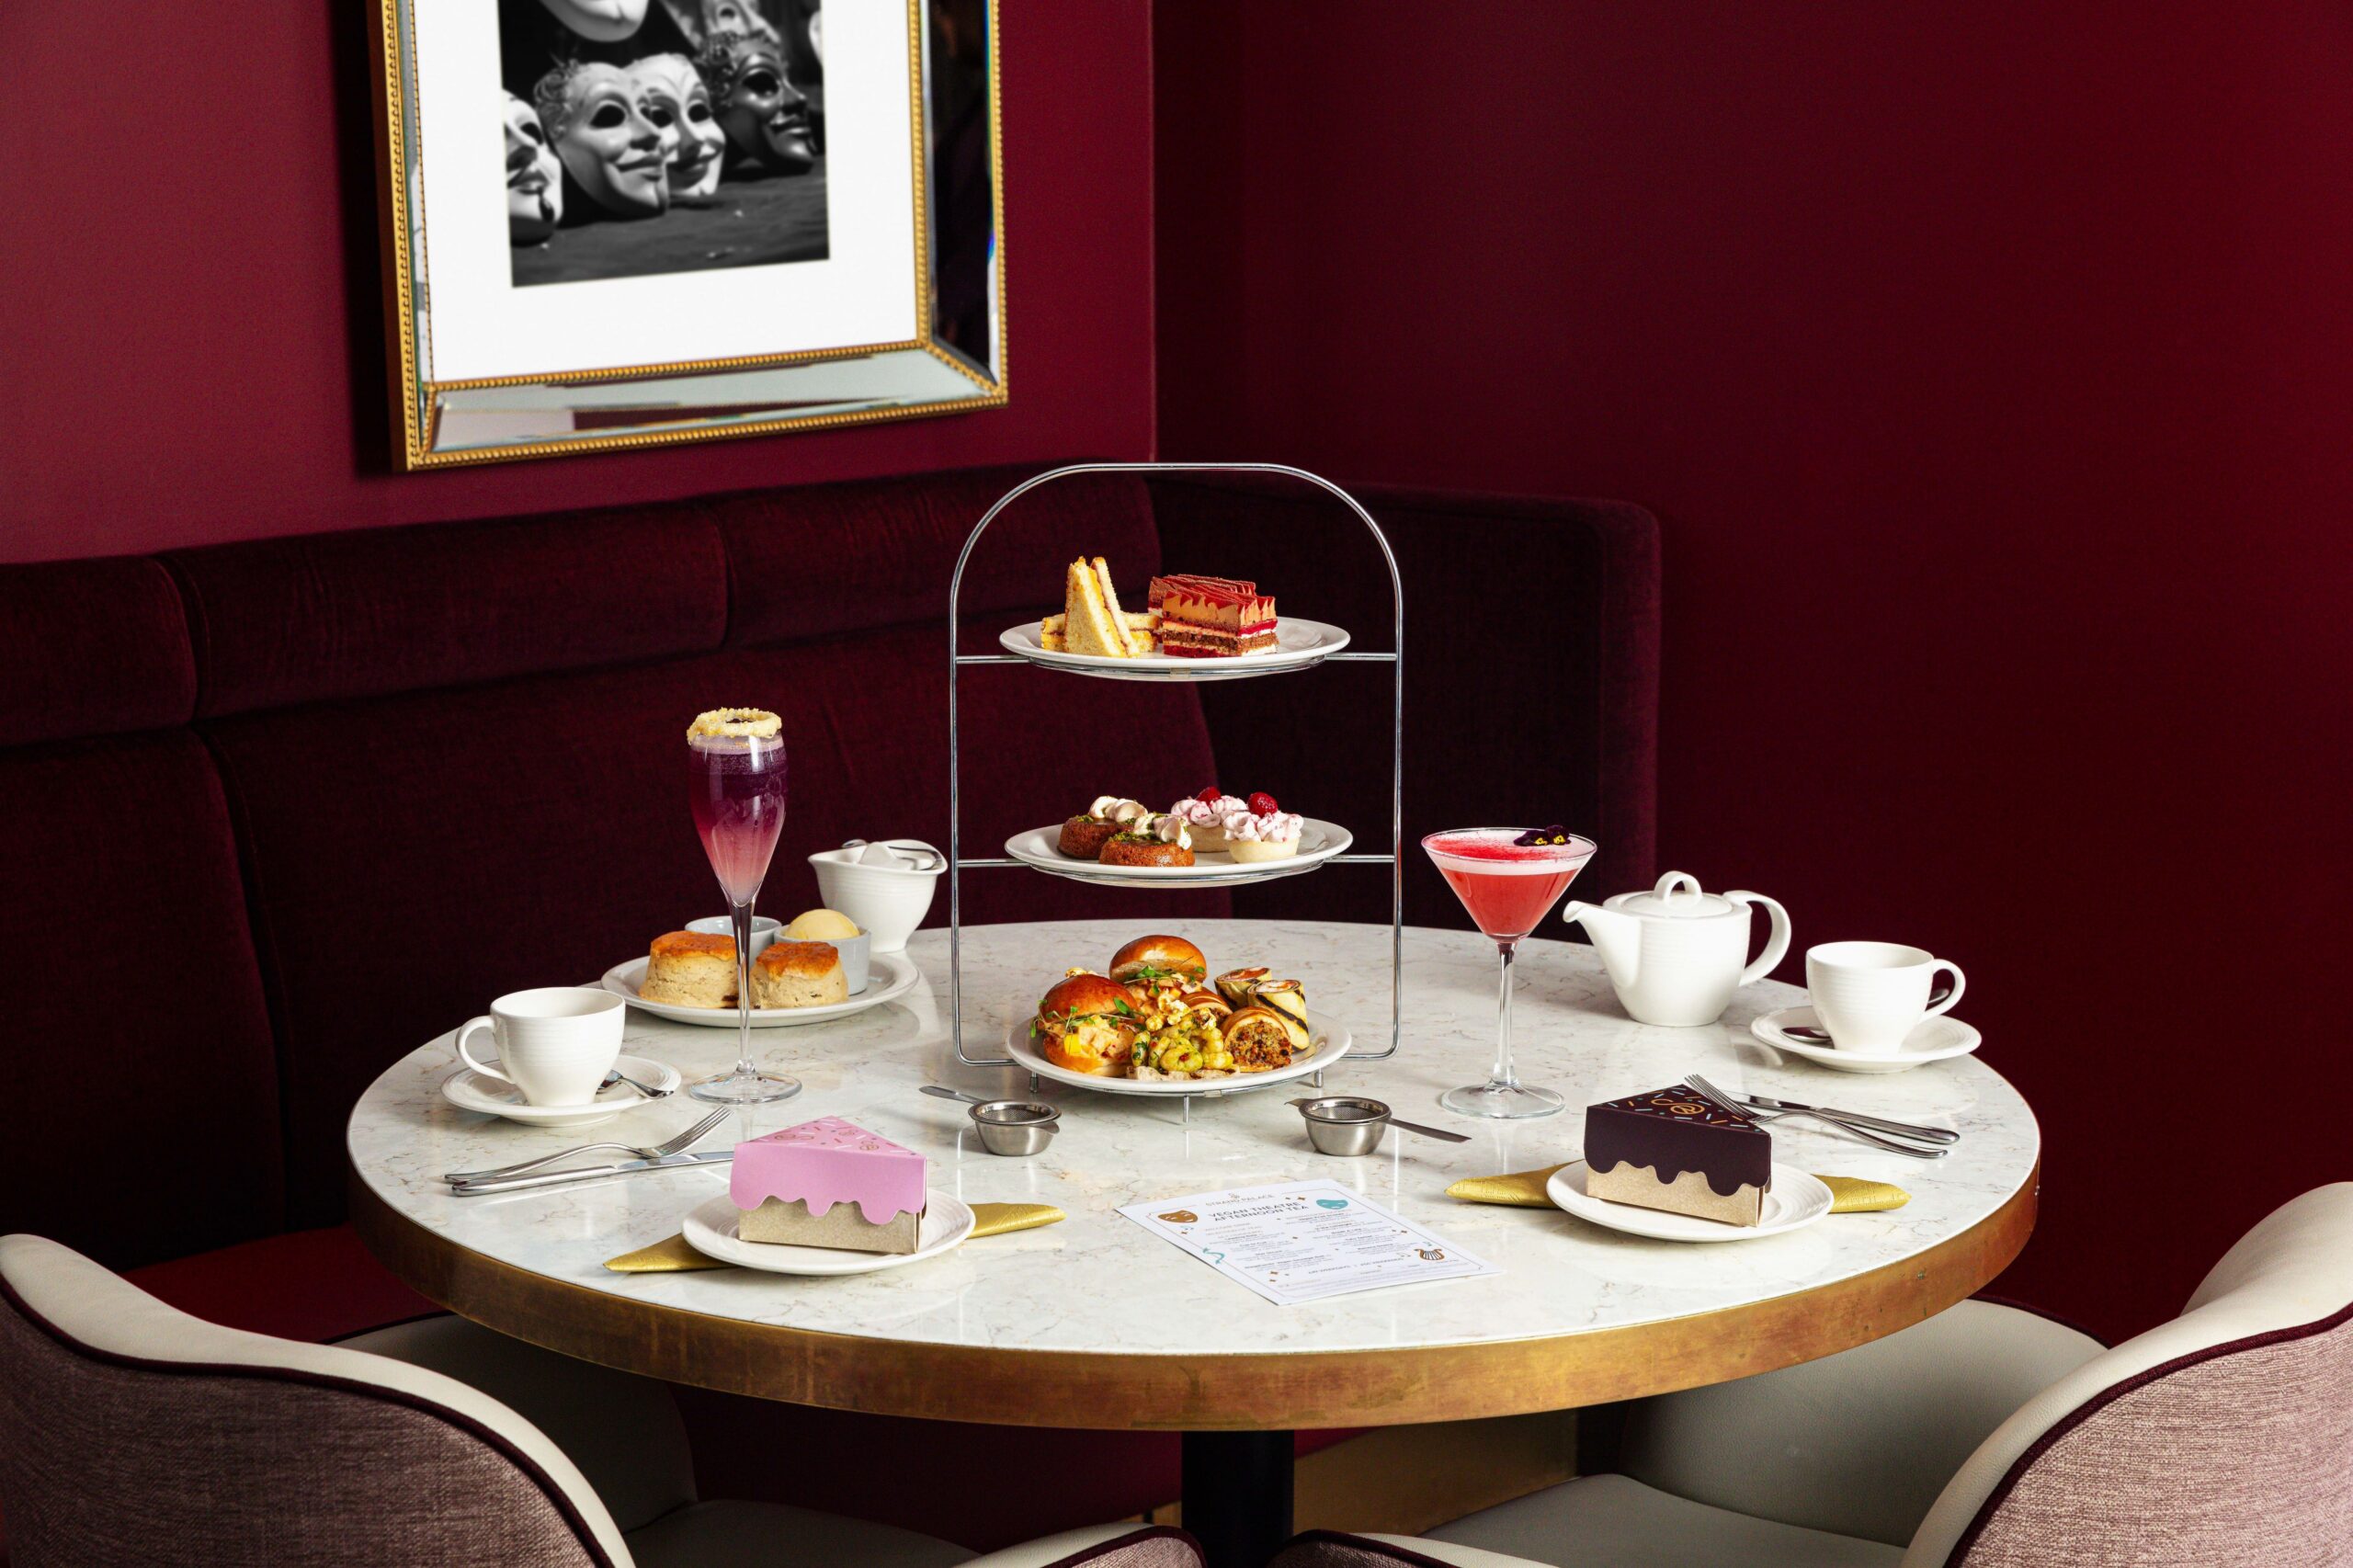 Strand Palace Launches a new Afternoon Tea Inspired by Their Partnership with the Peacock Theatre